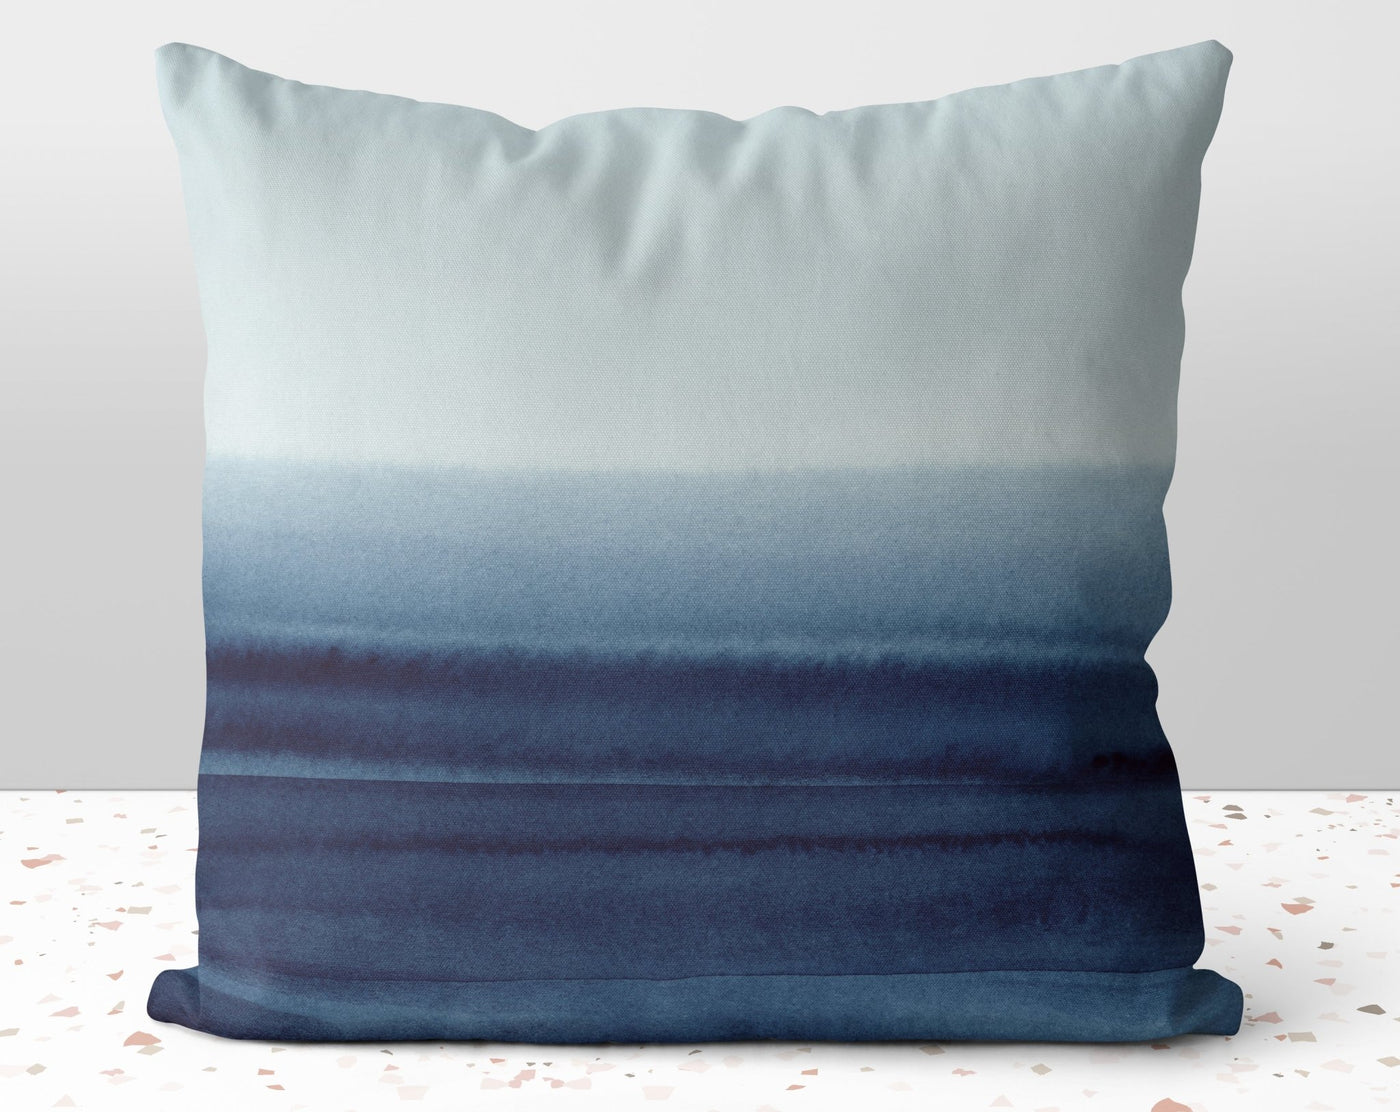 Abstract Royal Blue Ocean Landscape Stripes Square Pillow with Cover Throw with Insert - Cush Potato Pillows